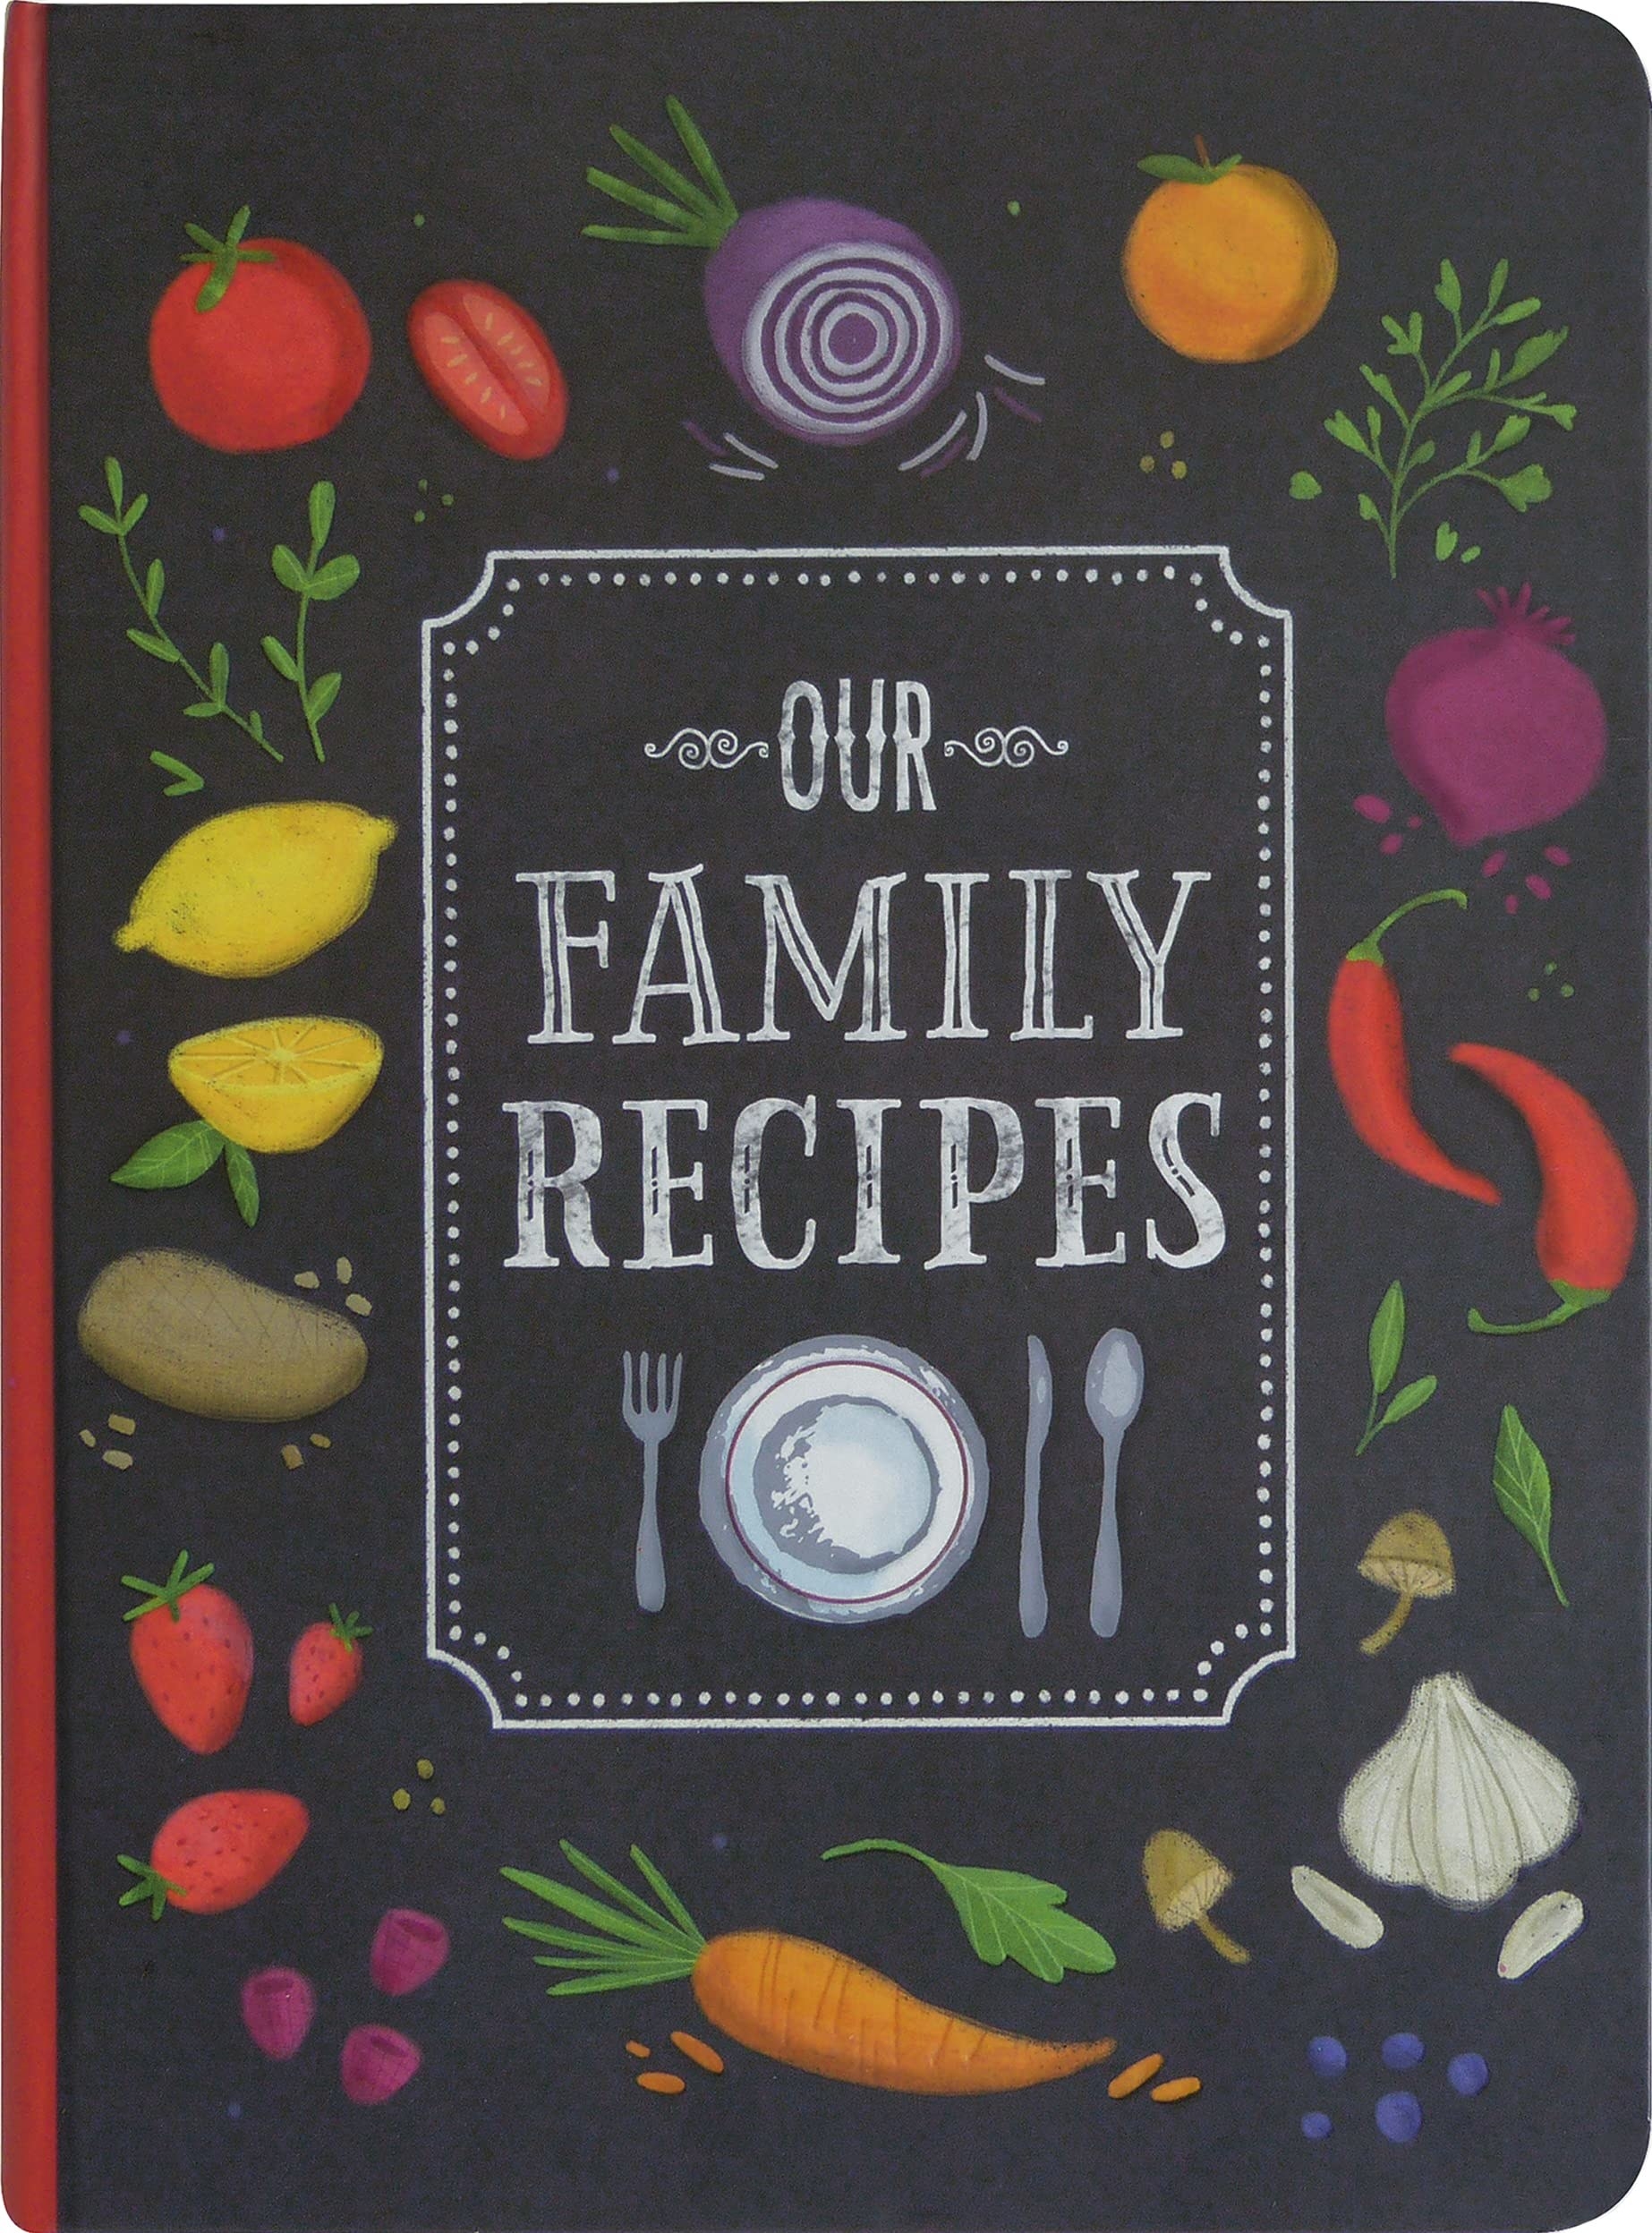 the cover of our family recipes